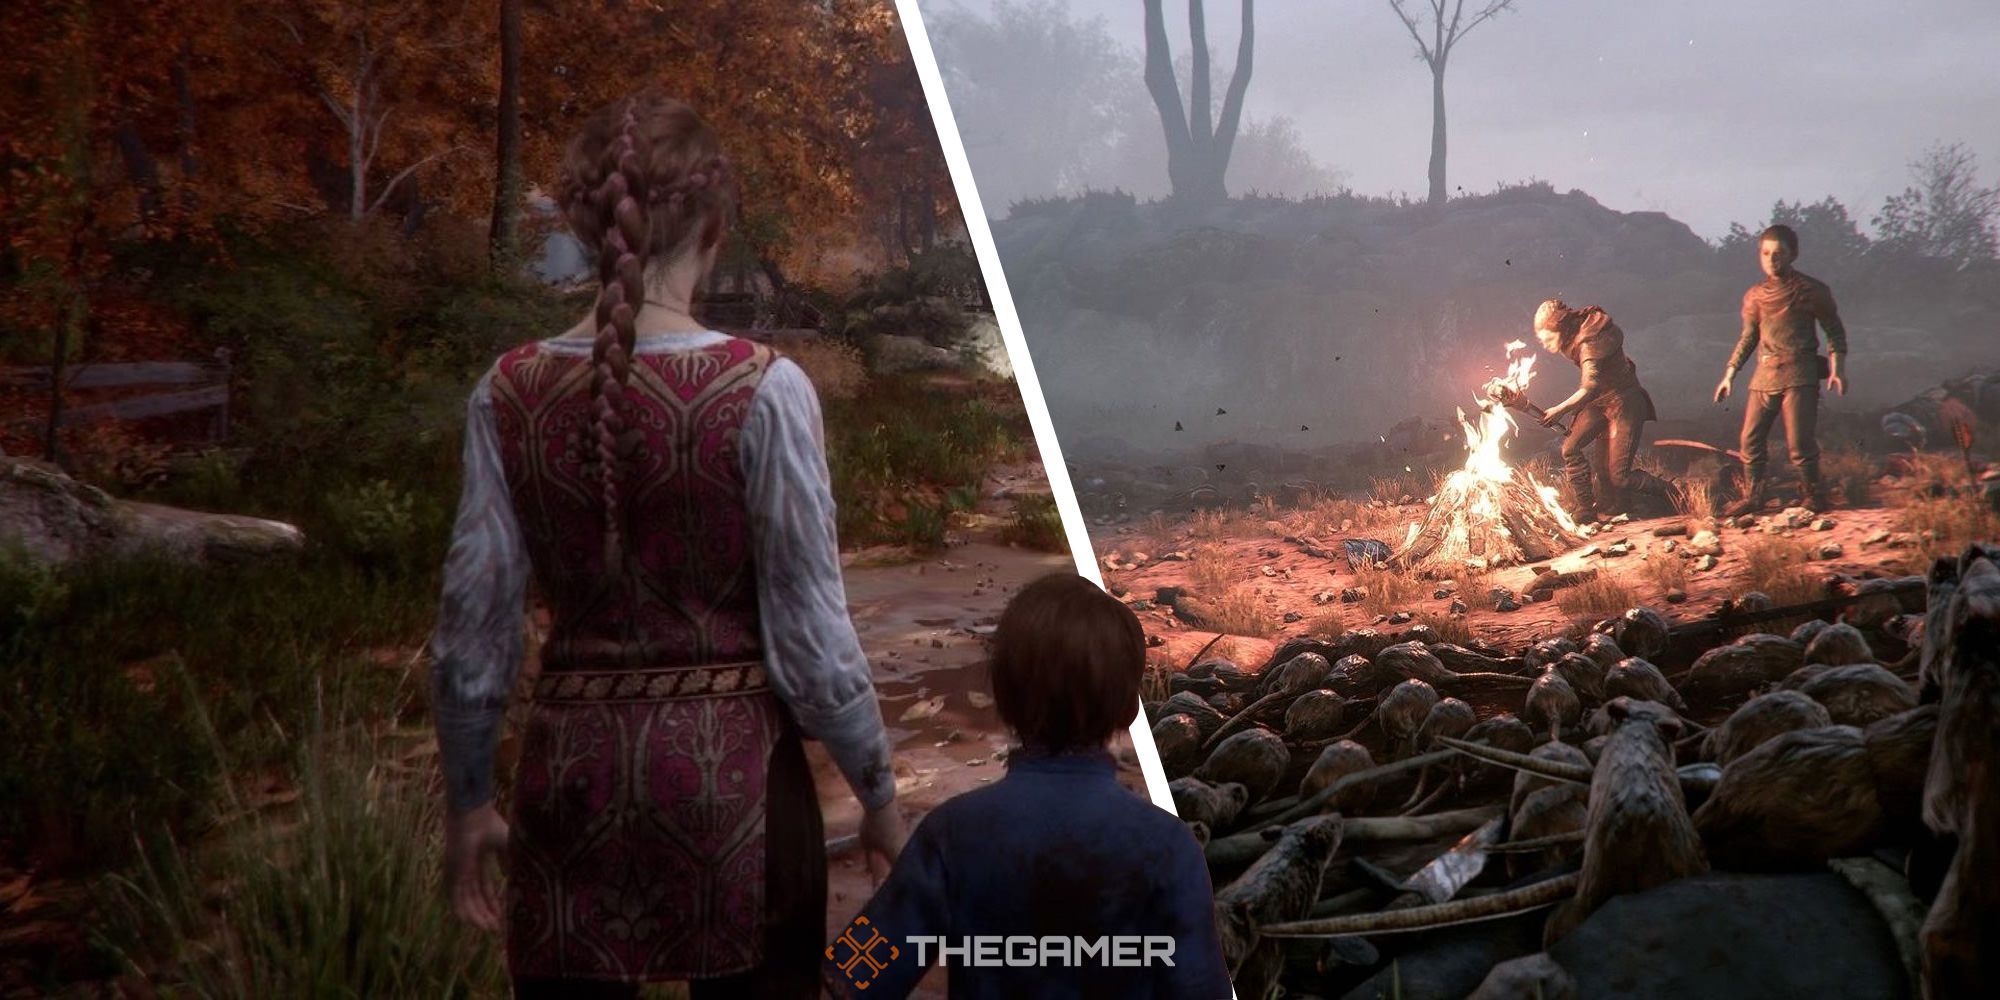 This Custom Xbox For A Plague Tale Looks Really Awesome - GameSpot